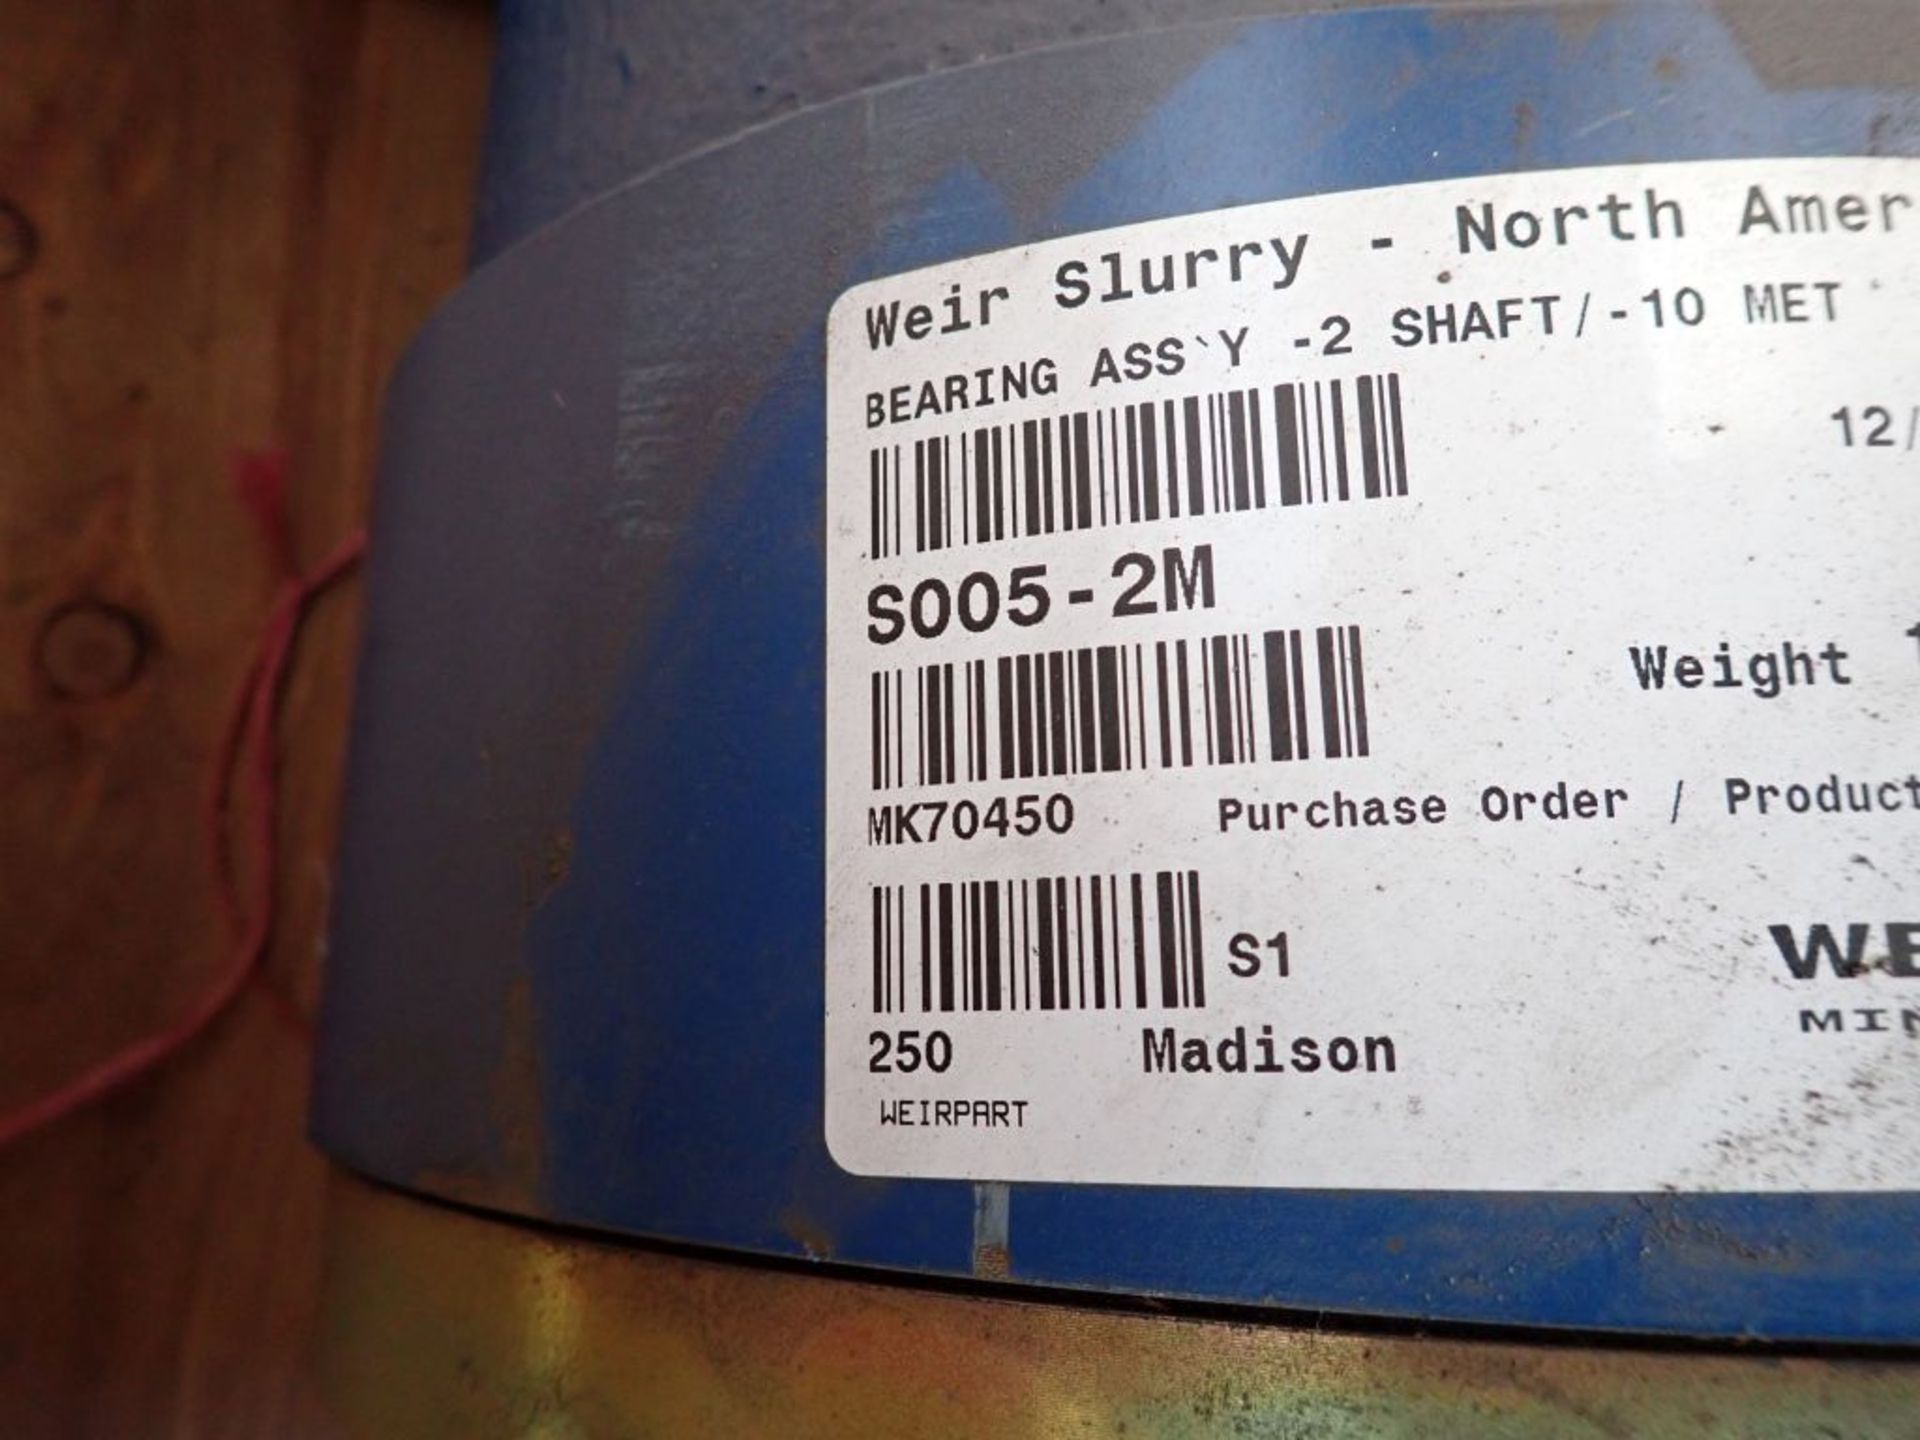 Weir Slurry Bearing Assembly | Part No. S005-2M; 2-Shaft 1-10 MET - Image 4 of 7